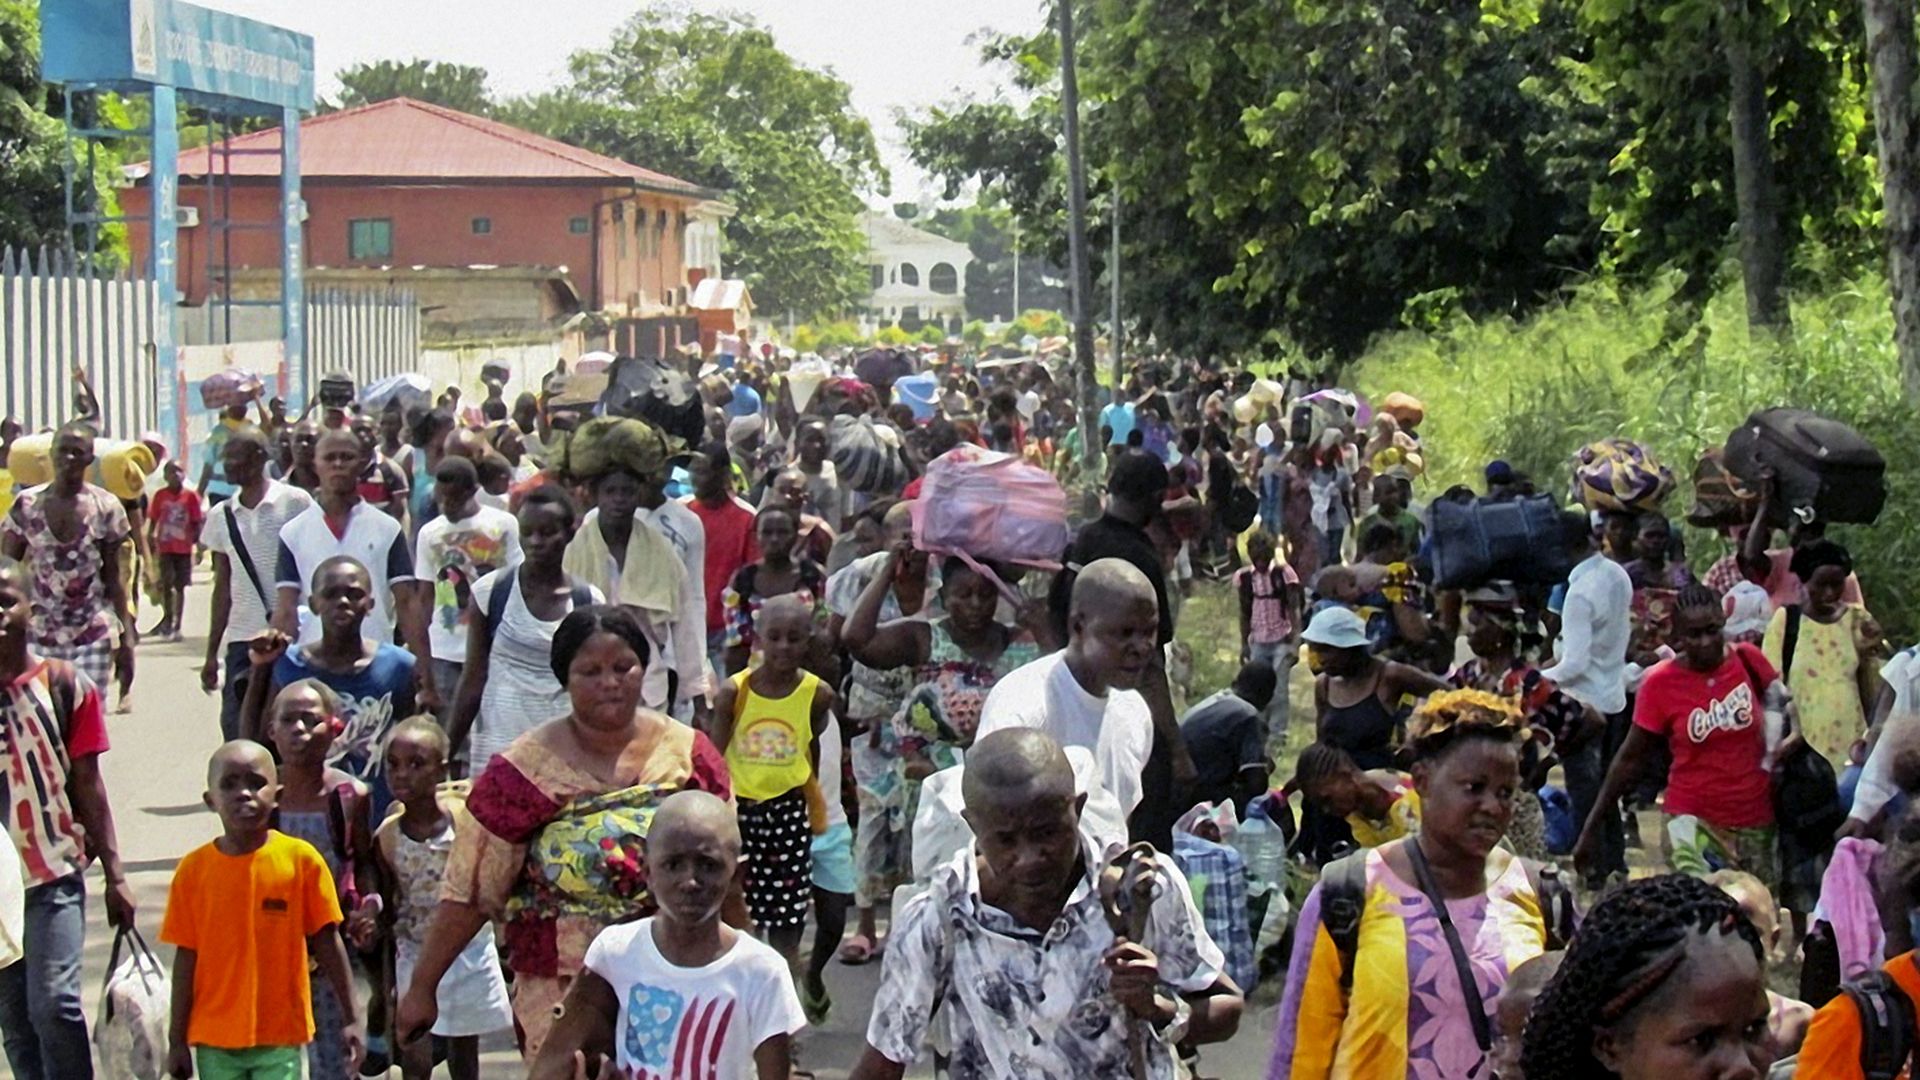 A crowd of people in Brazzaville